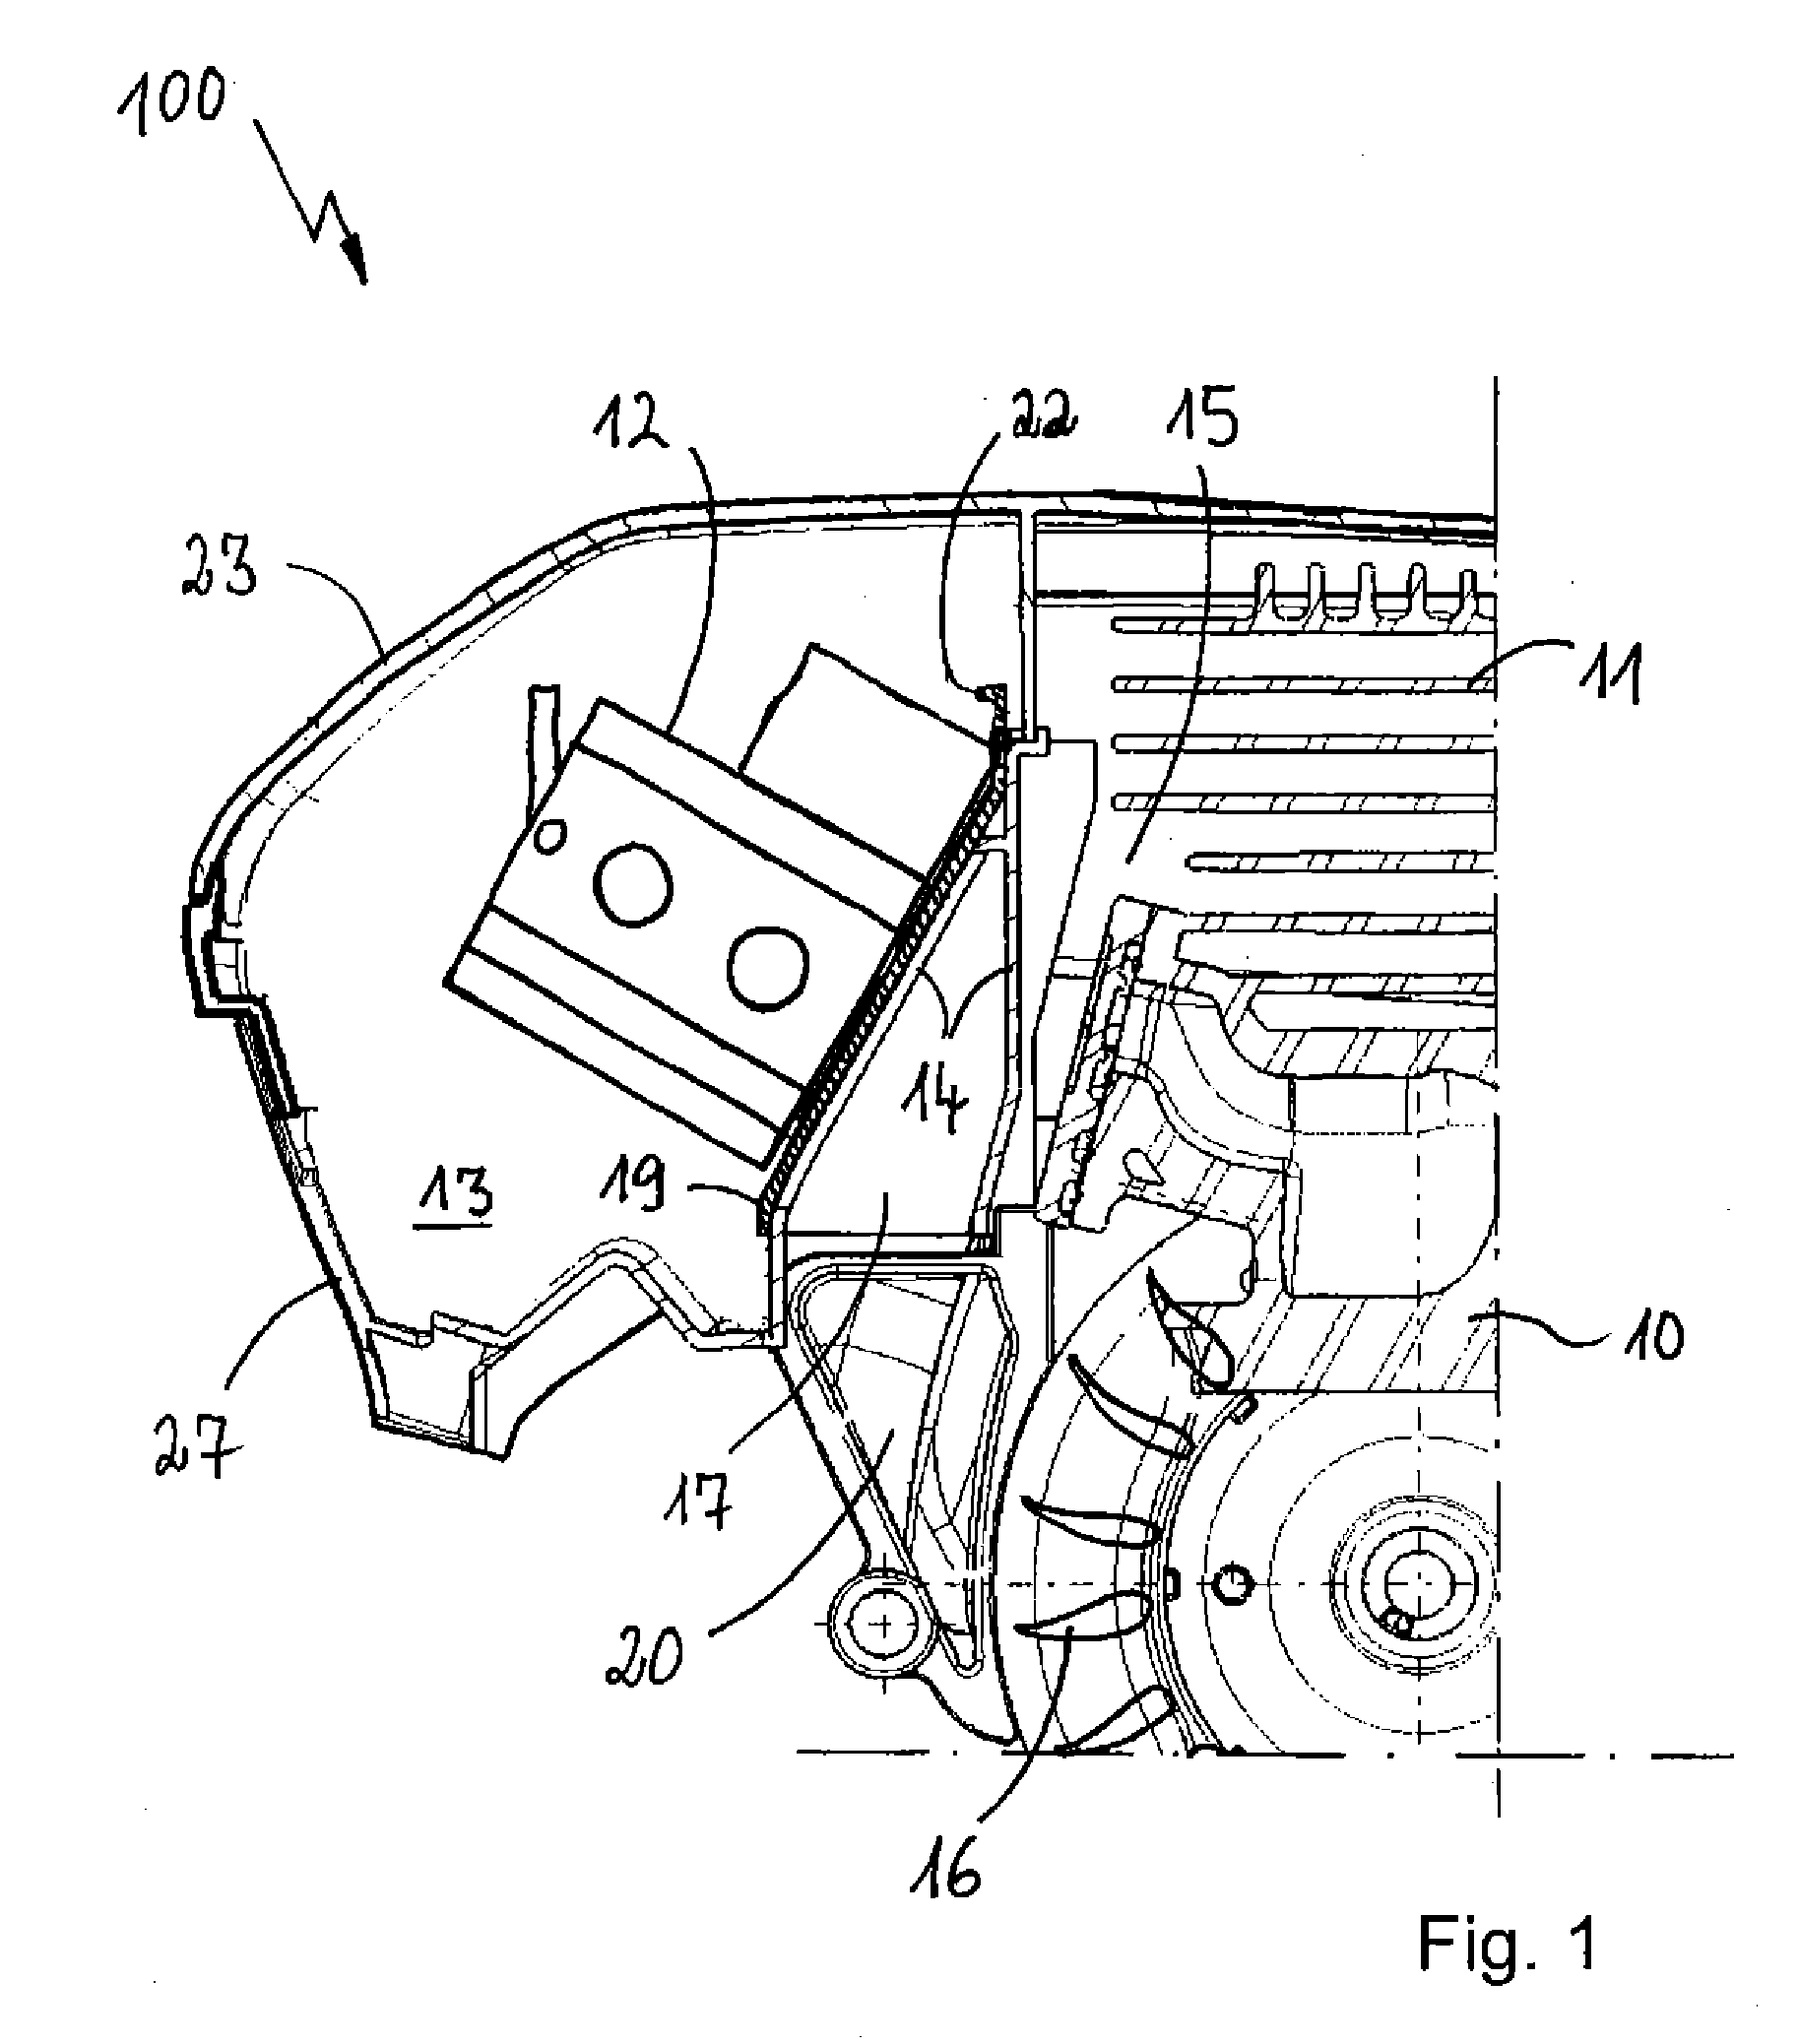 Motor-driven implement having switchable summer-winter operating function